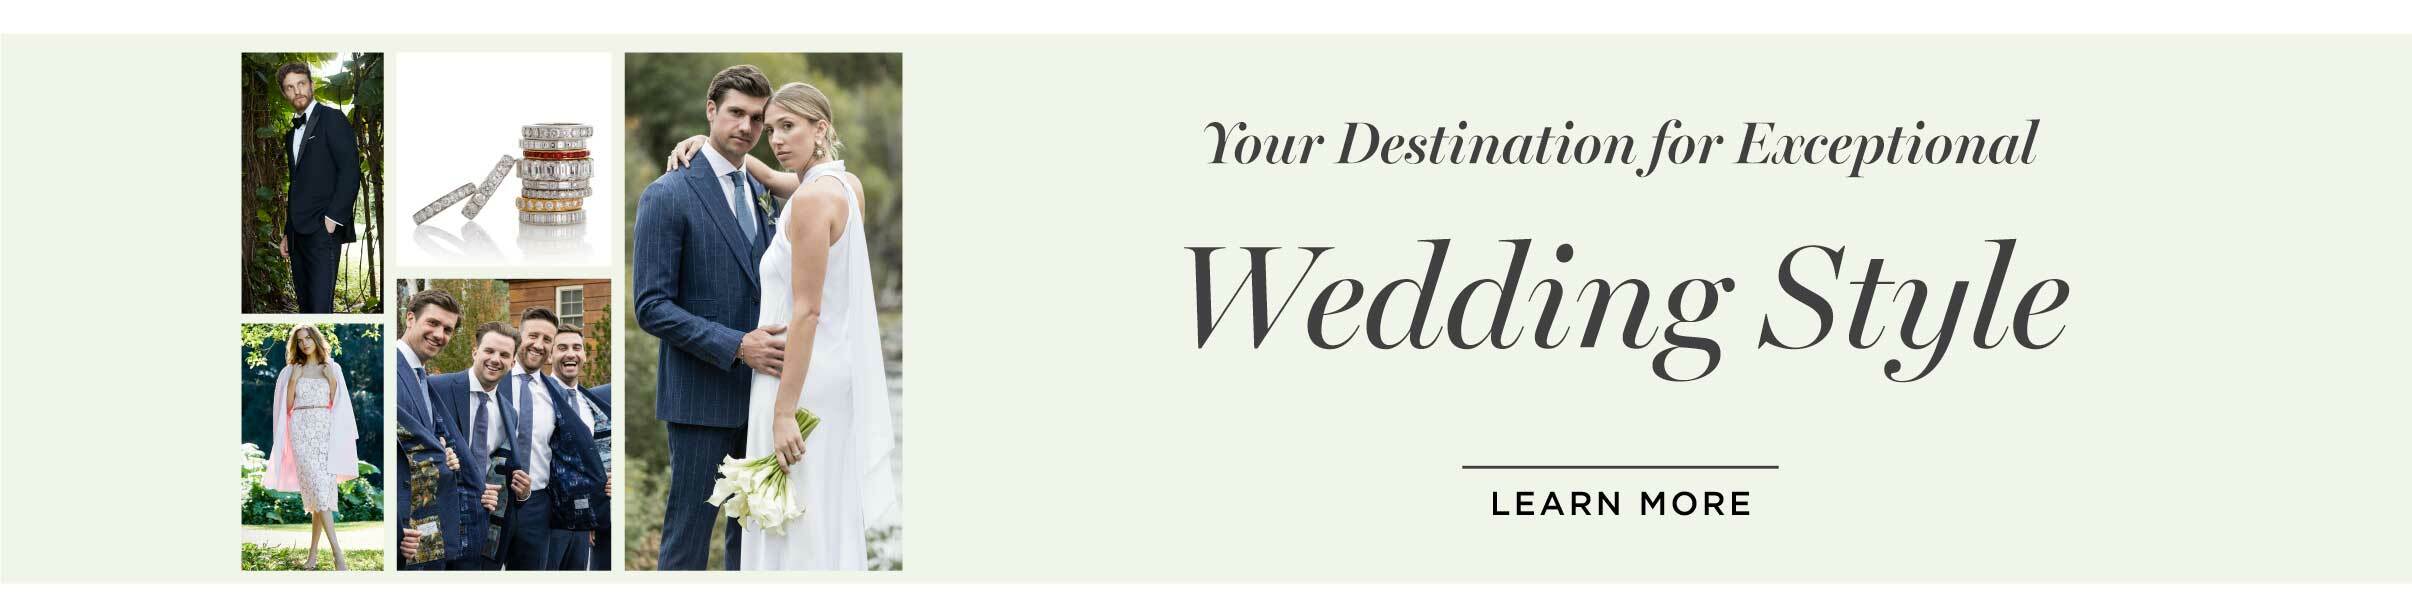 Your Destination for Exceptional Wedding Style